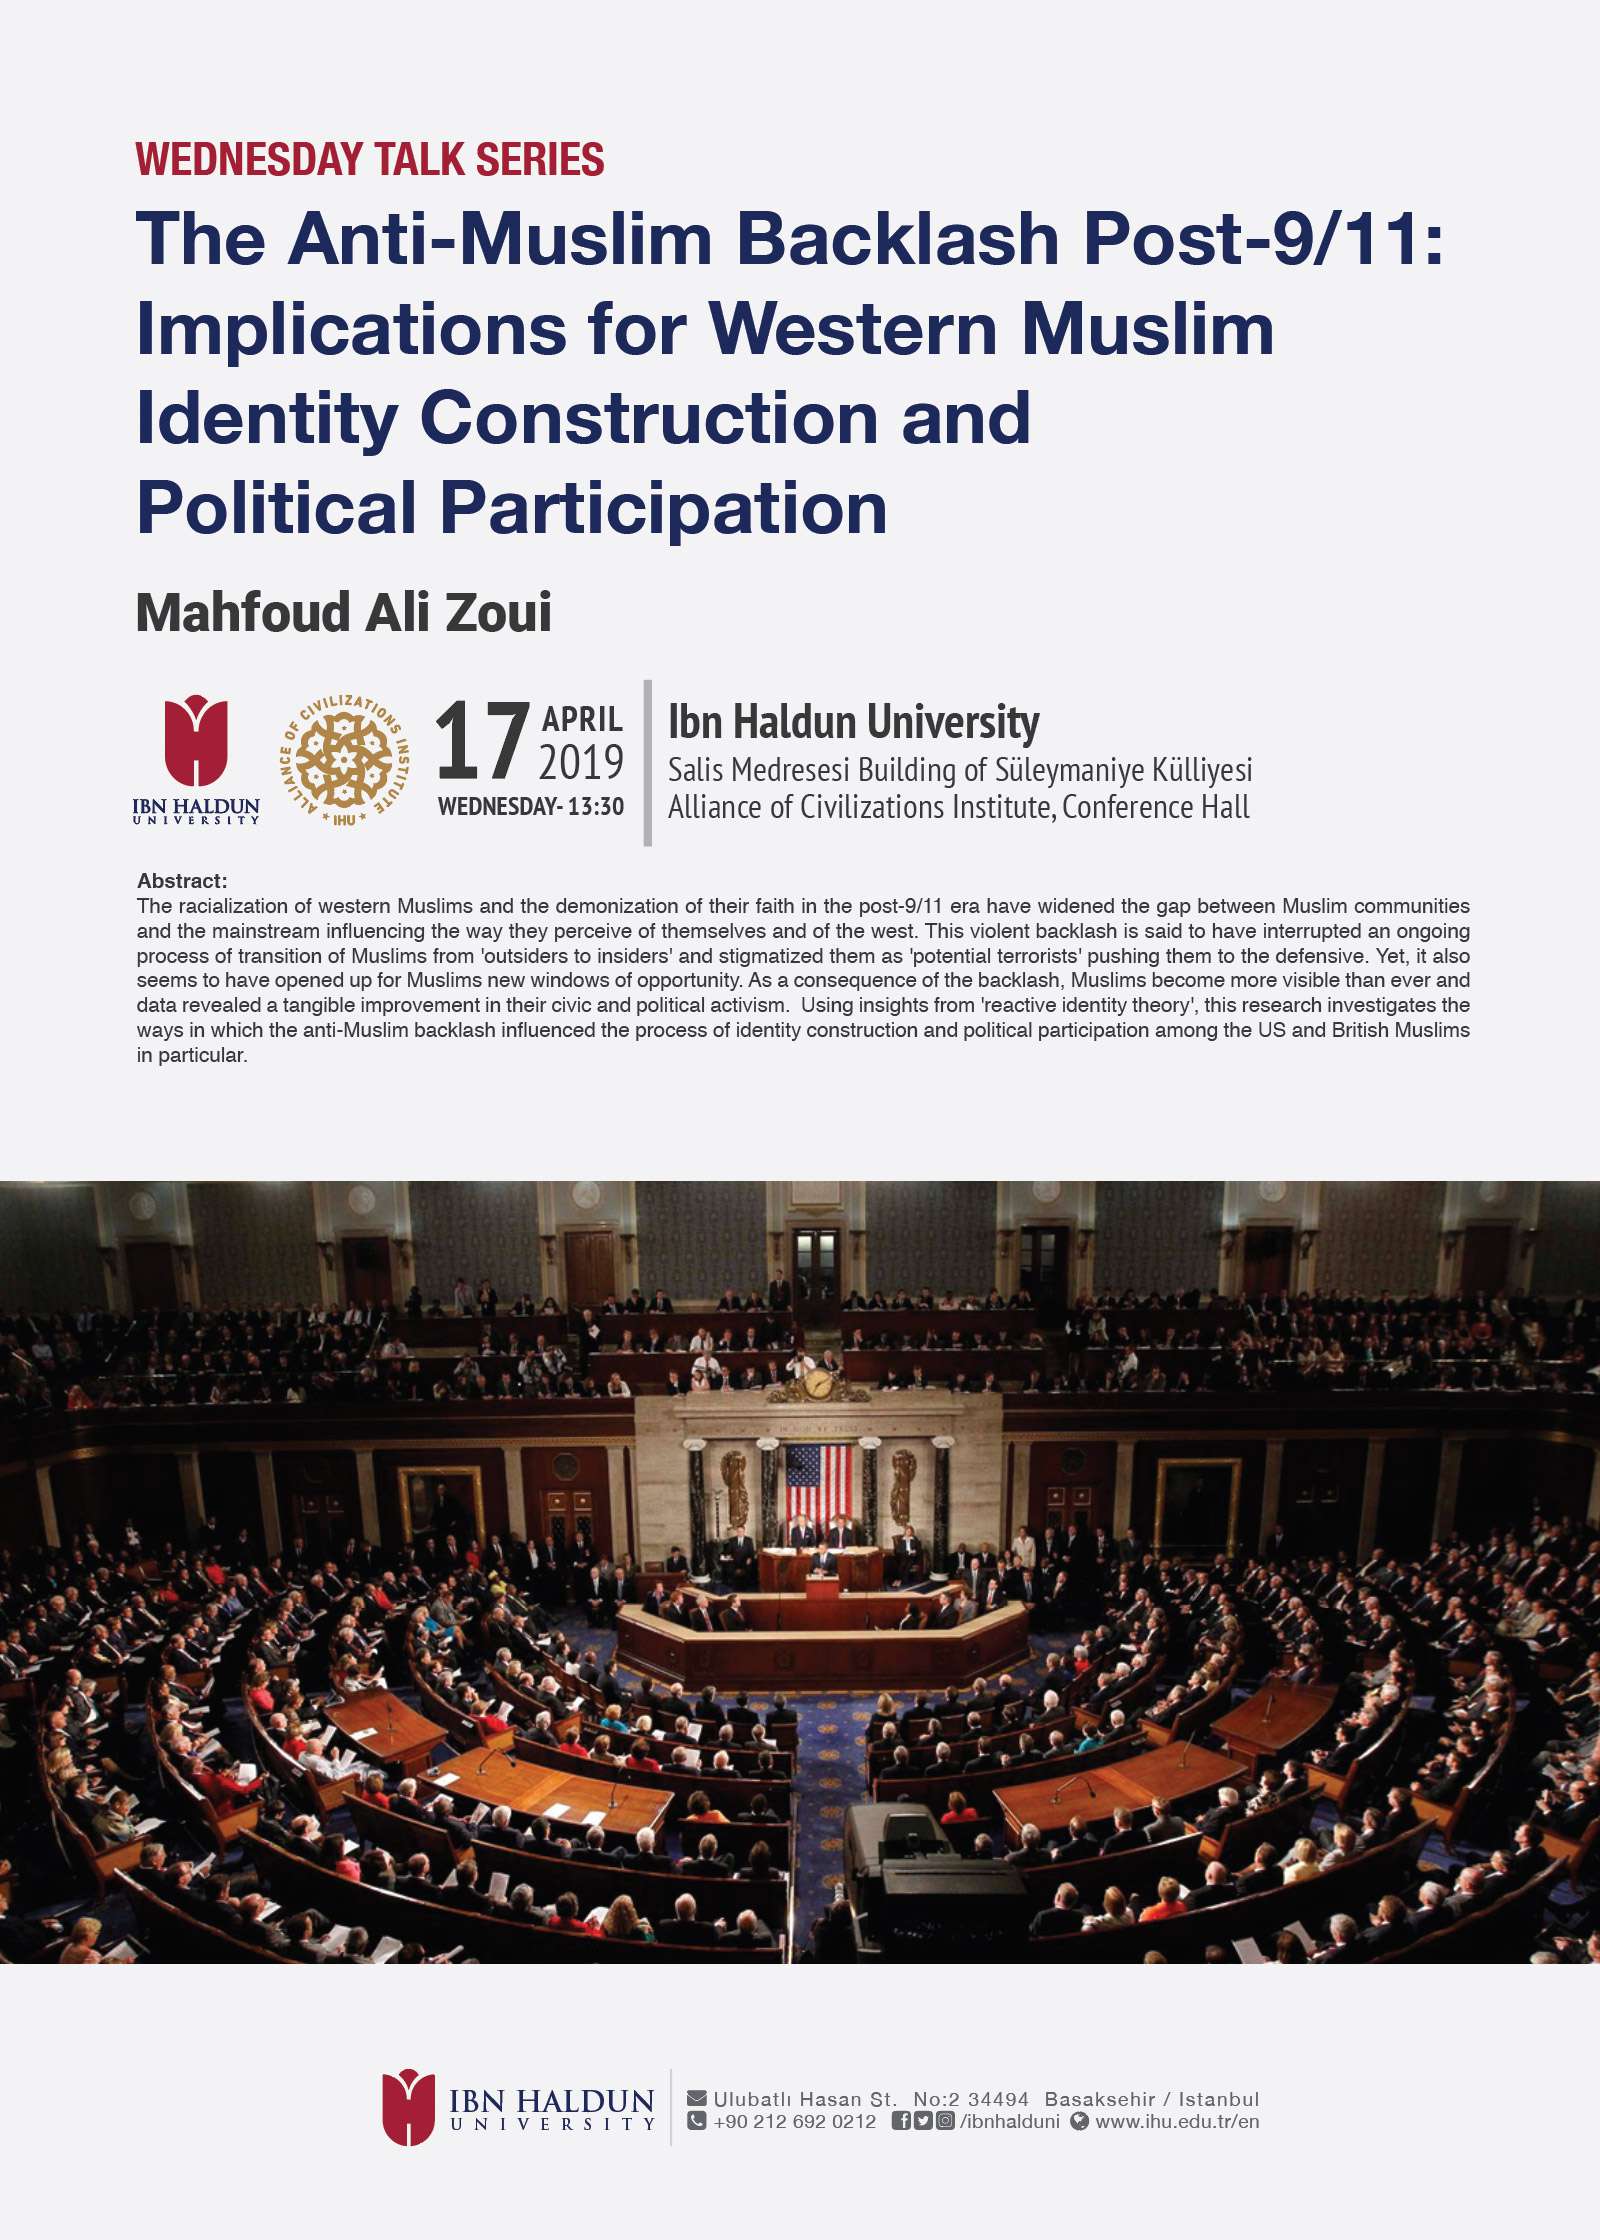 The Anti-Muslim Backlash Post-9/11: Implications for Western Muslim Identity Construction and Political Participation